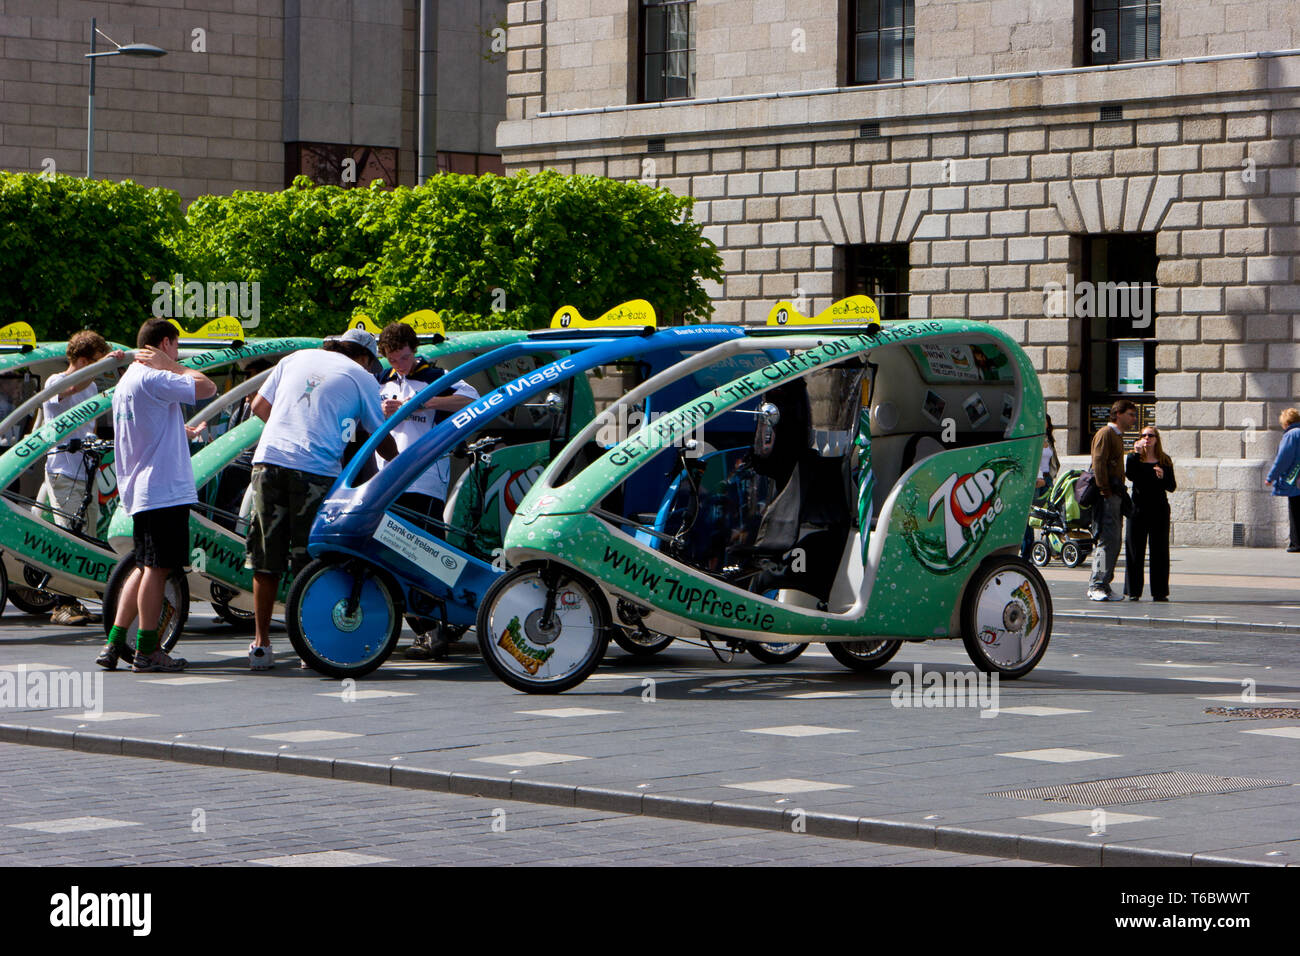 Tricycle cabs in Dublin, Ireland Stock Photo